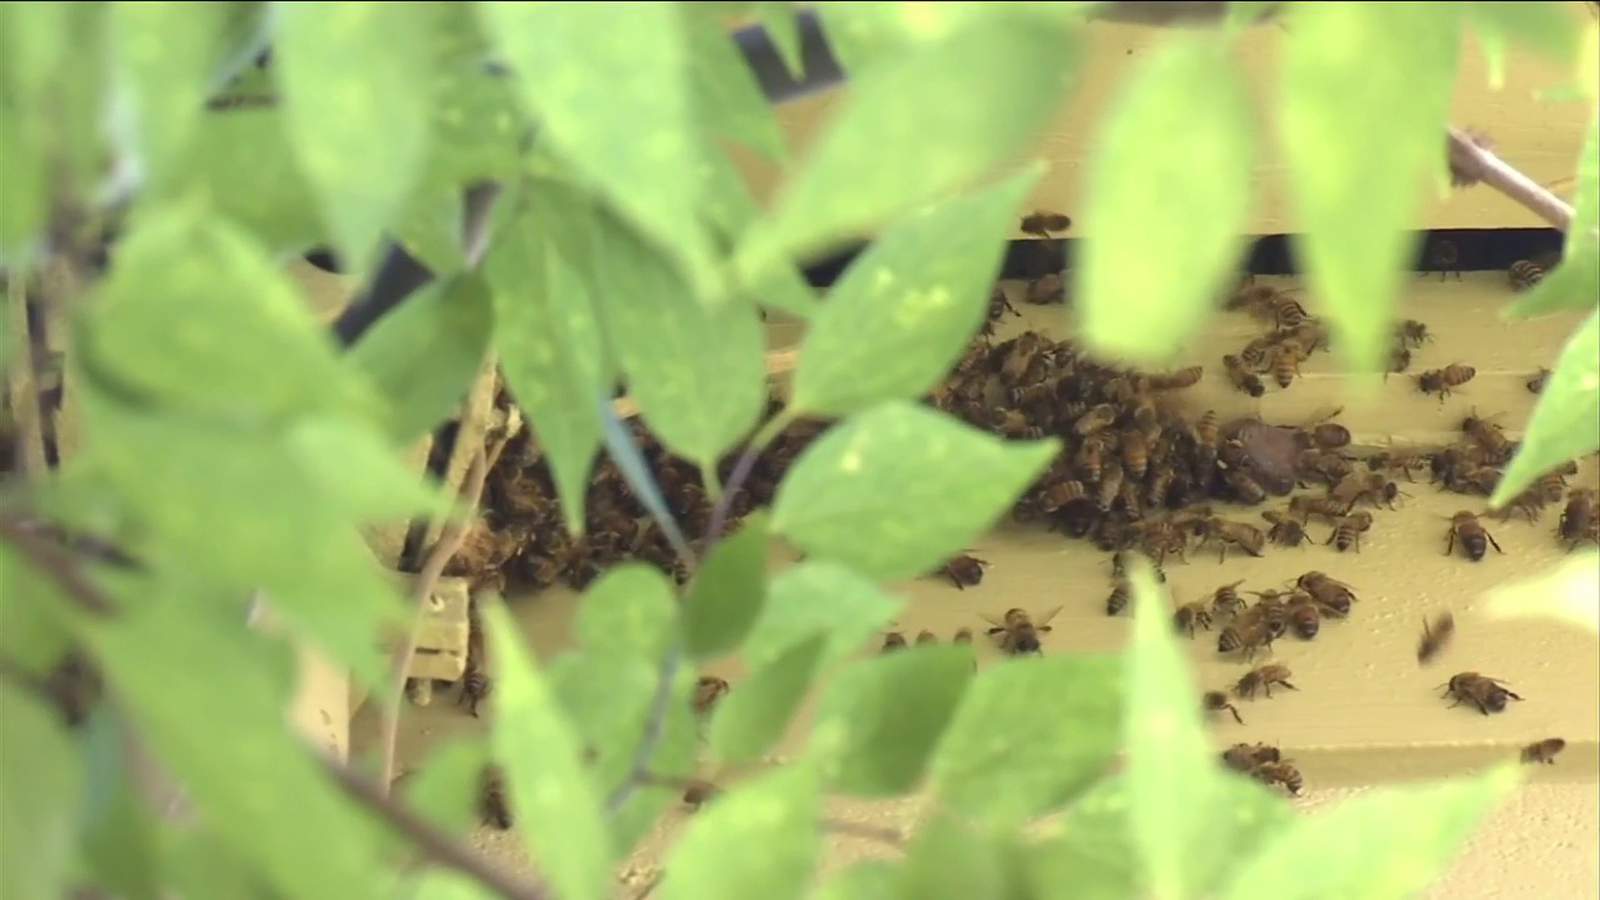 City steps in to help Jacksonville family hoping to rid apartment of bees